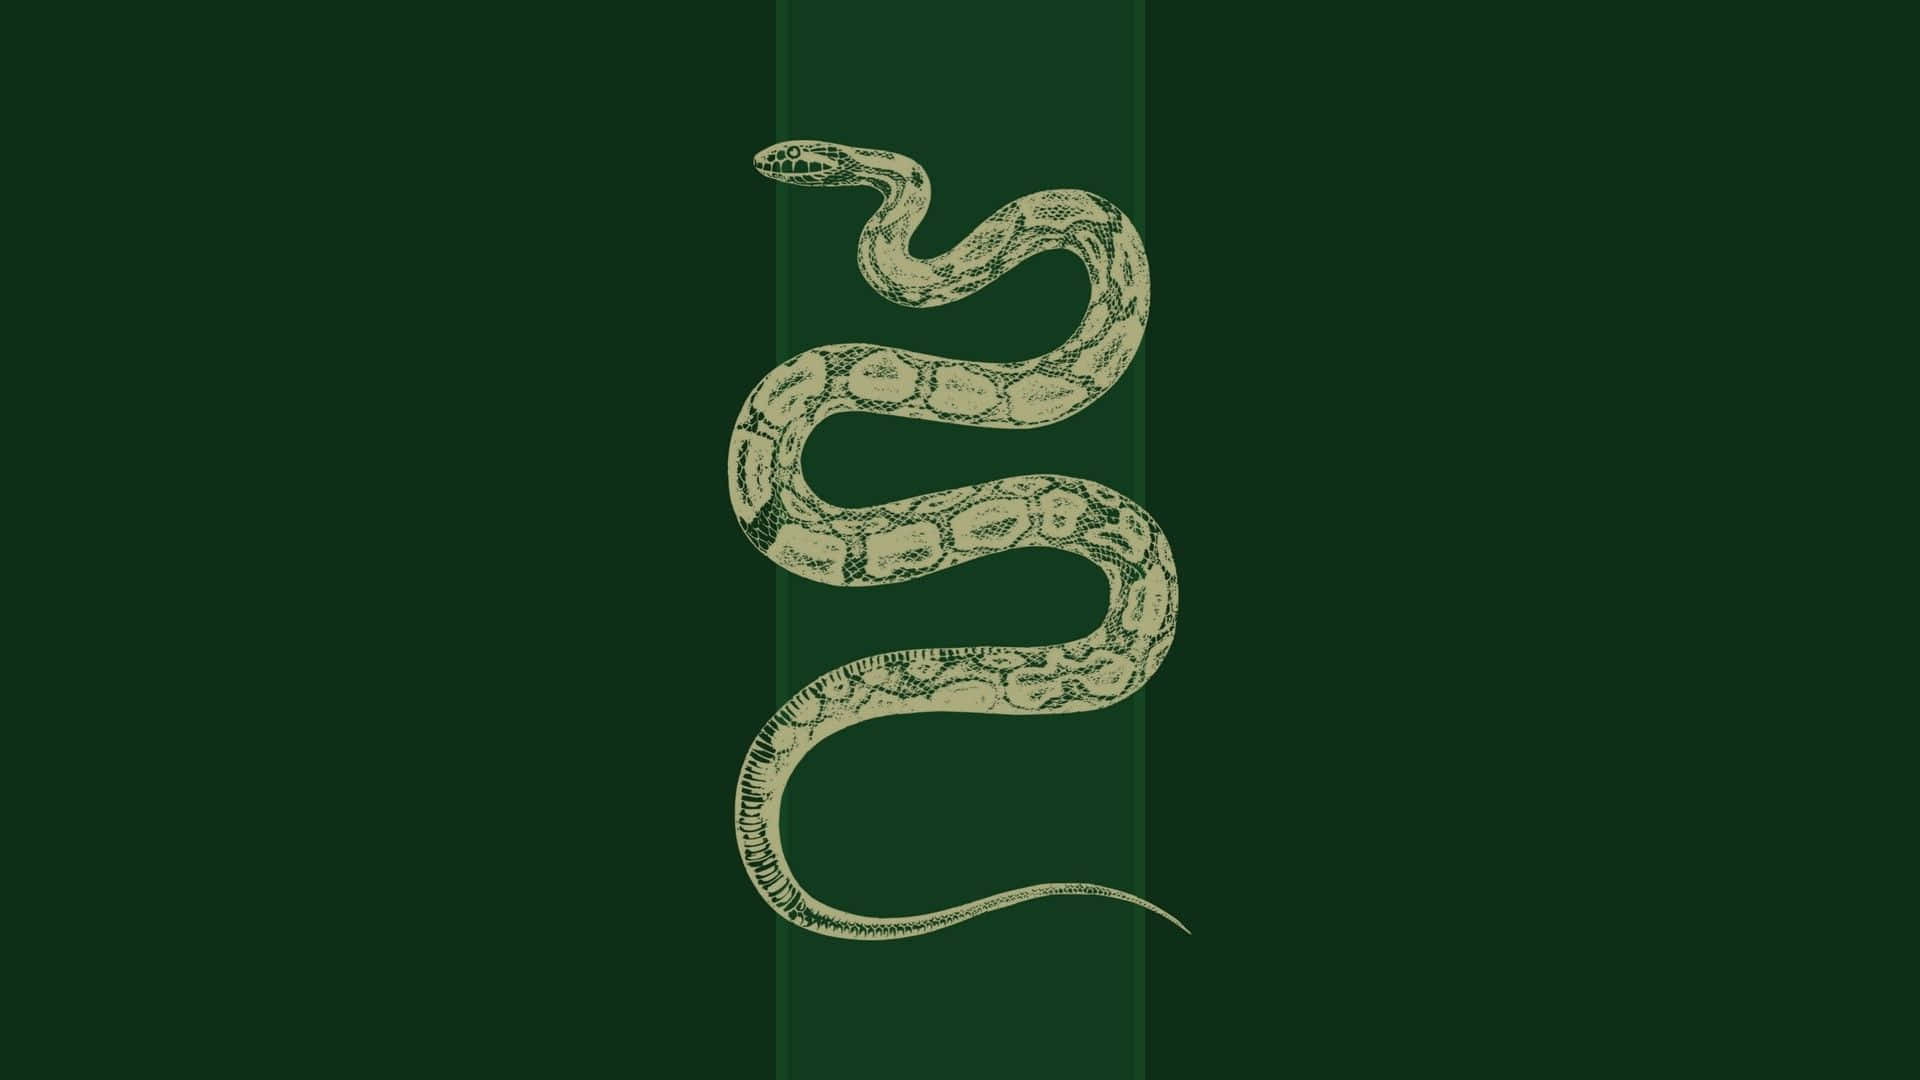 The Slytherin Serpent from Harry Potter Wallpaper